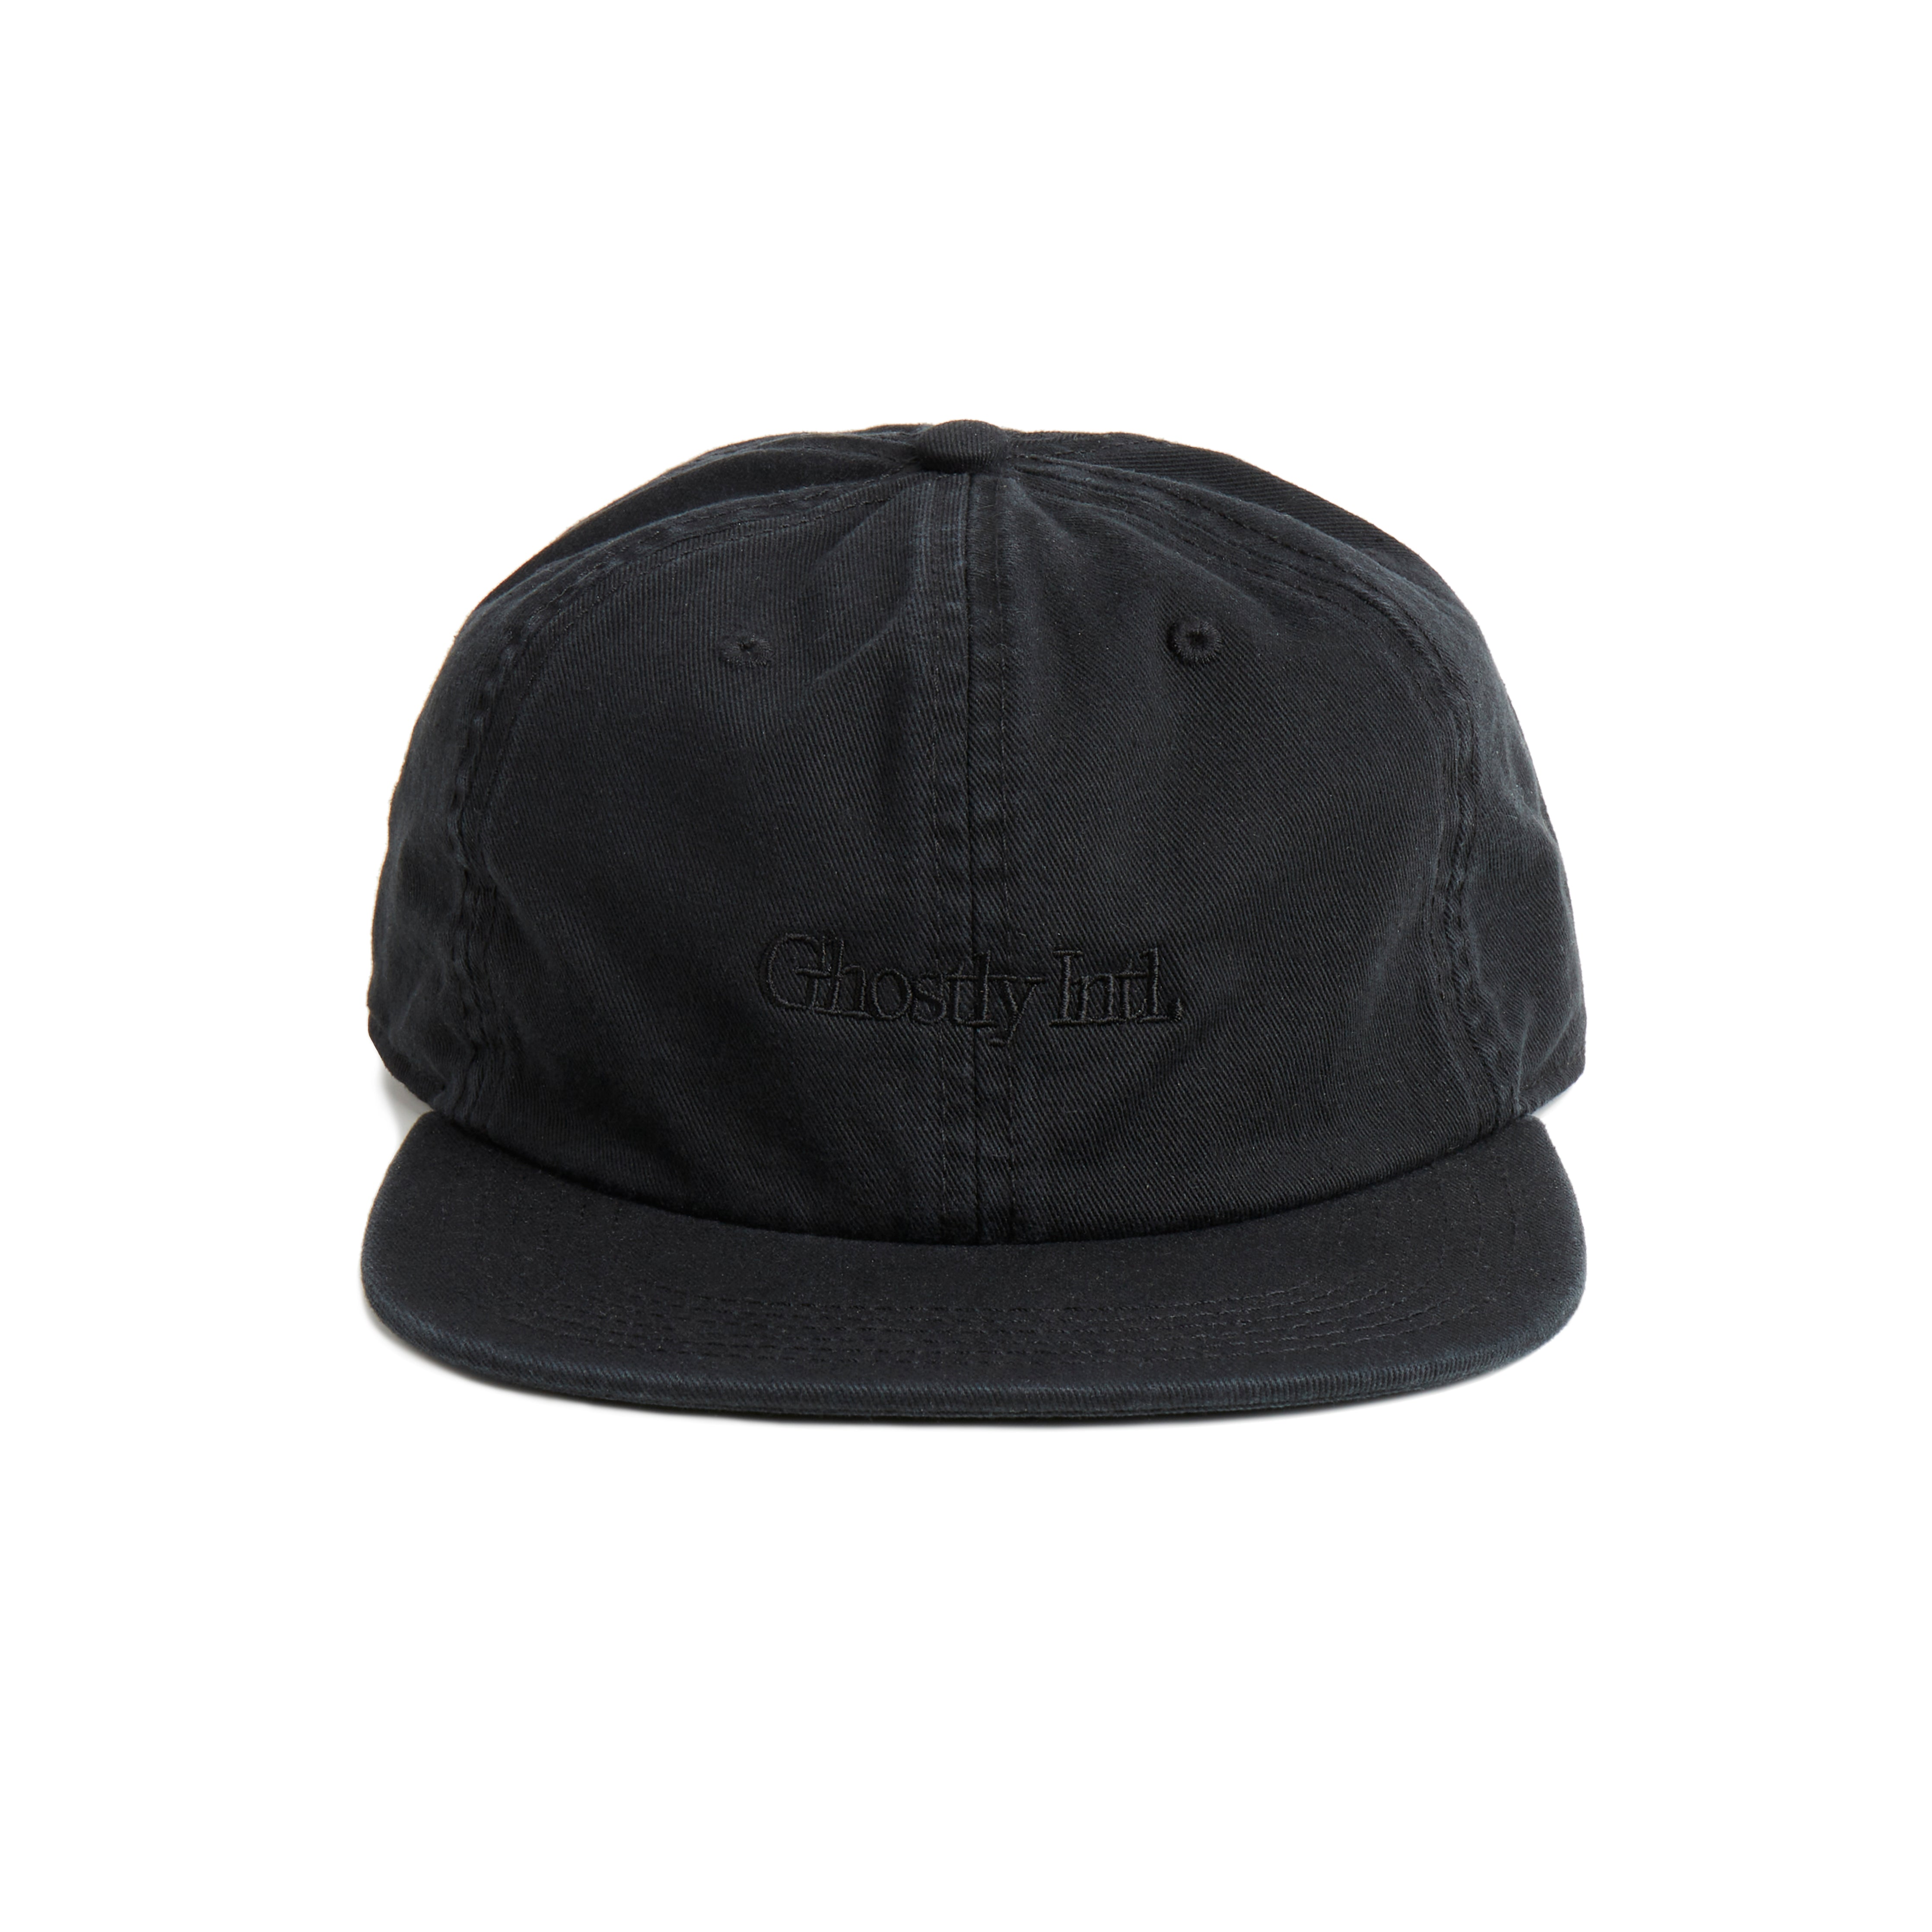 Ghostly International - Tonal Embroidered Cap